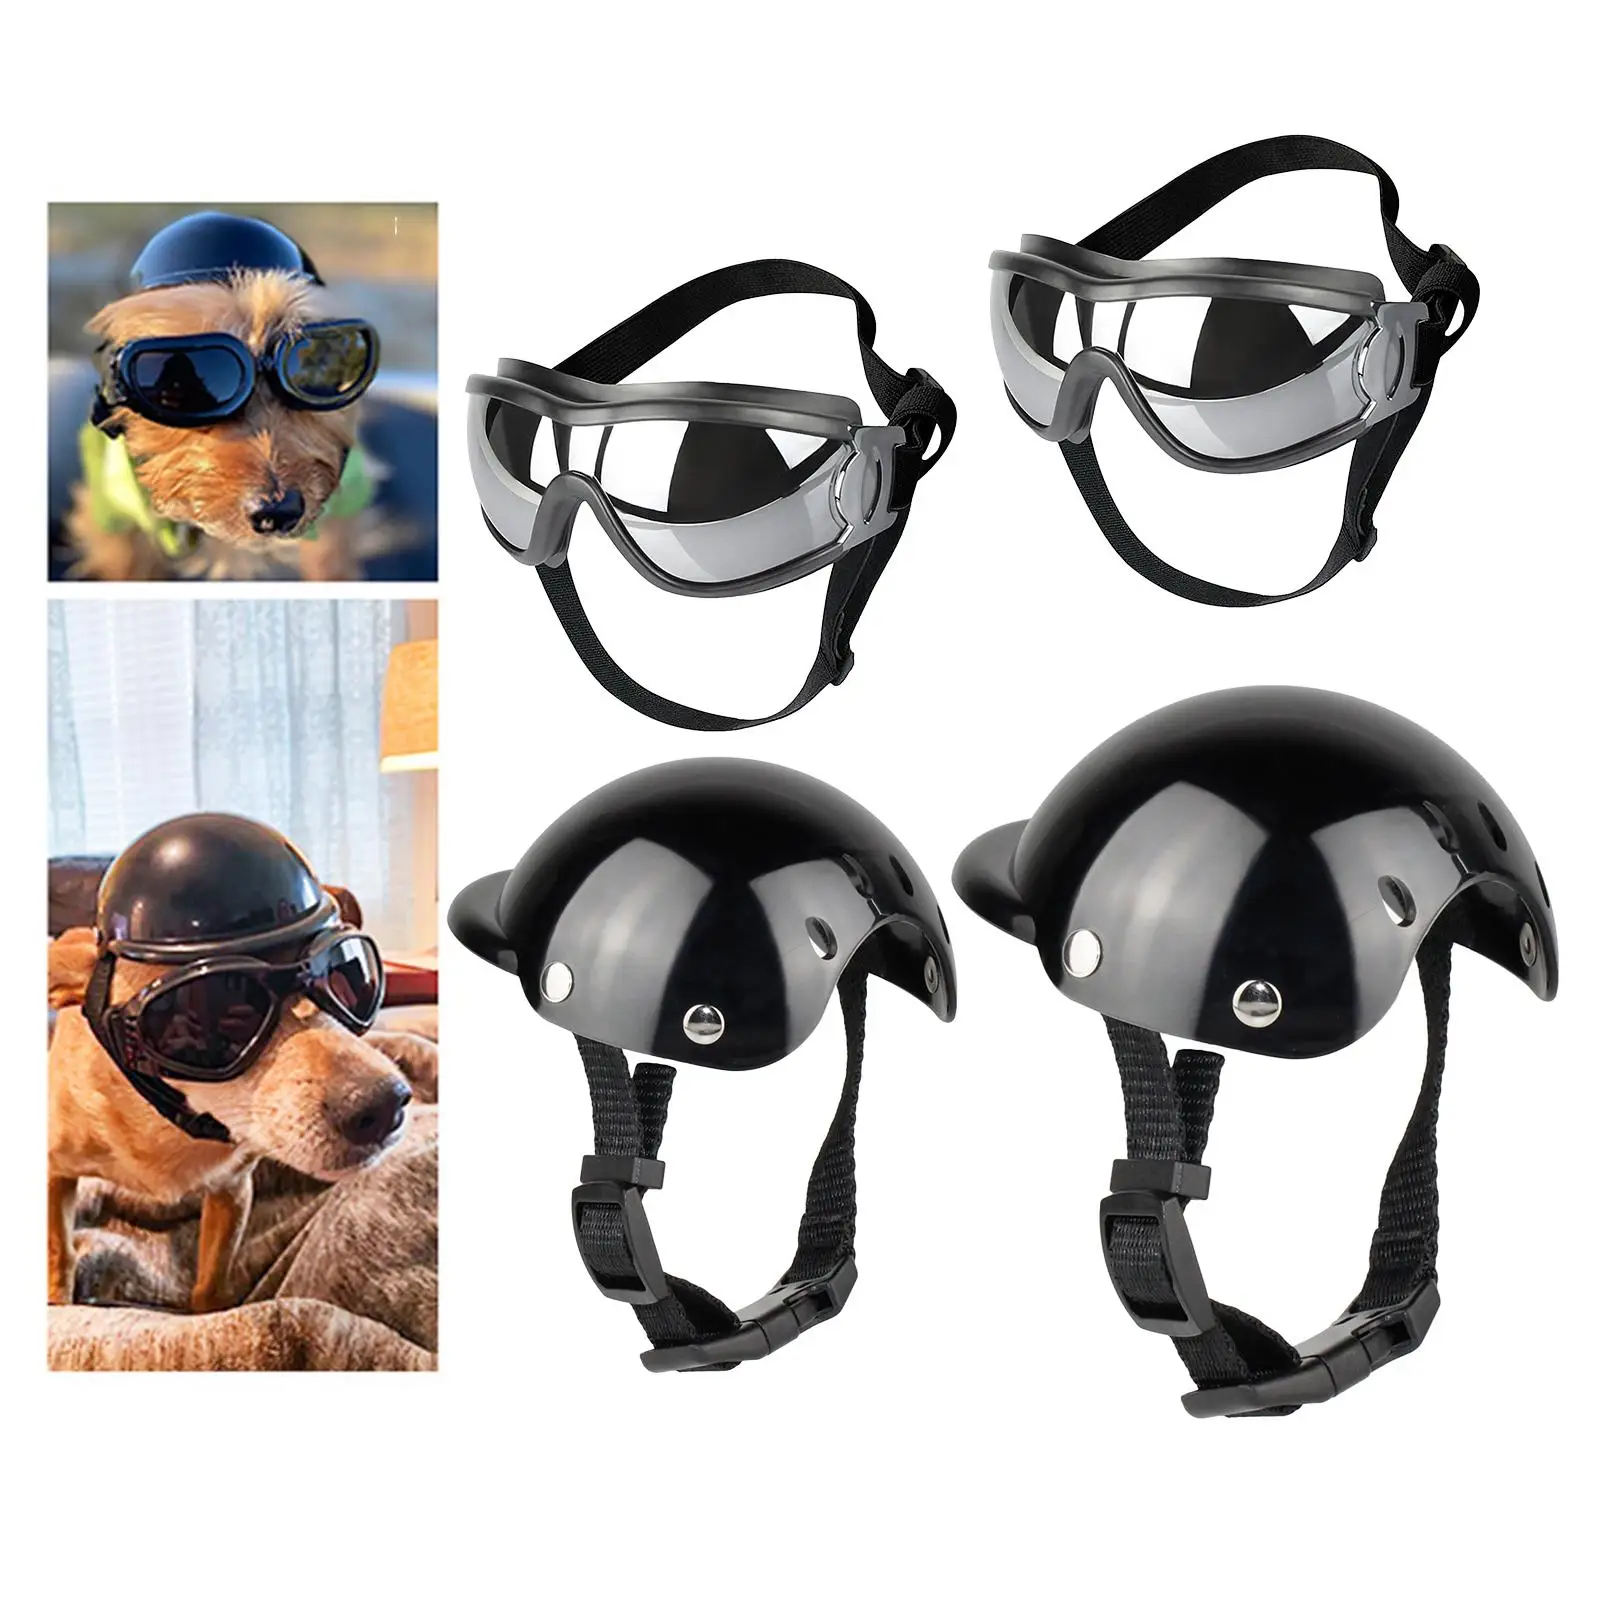 Summer Pet Dog Hat Breathable Sunglasses Hats Adjustable Puppy Sun Hat For Small Dogs Outdoor Walking Dogs Supplies Costumes